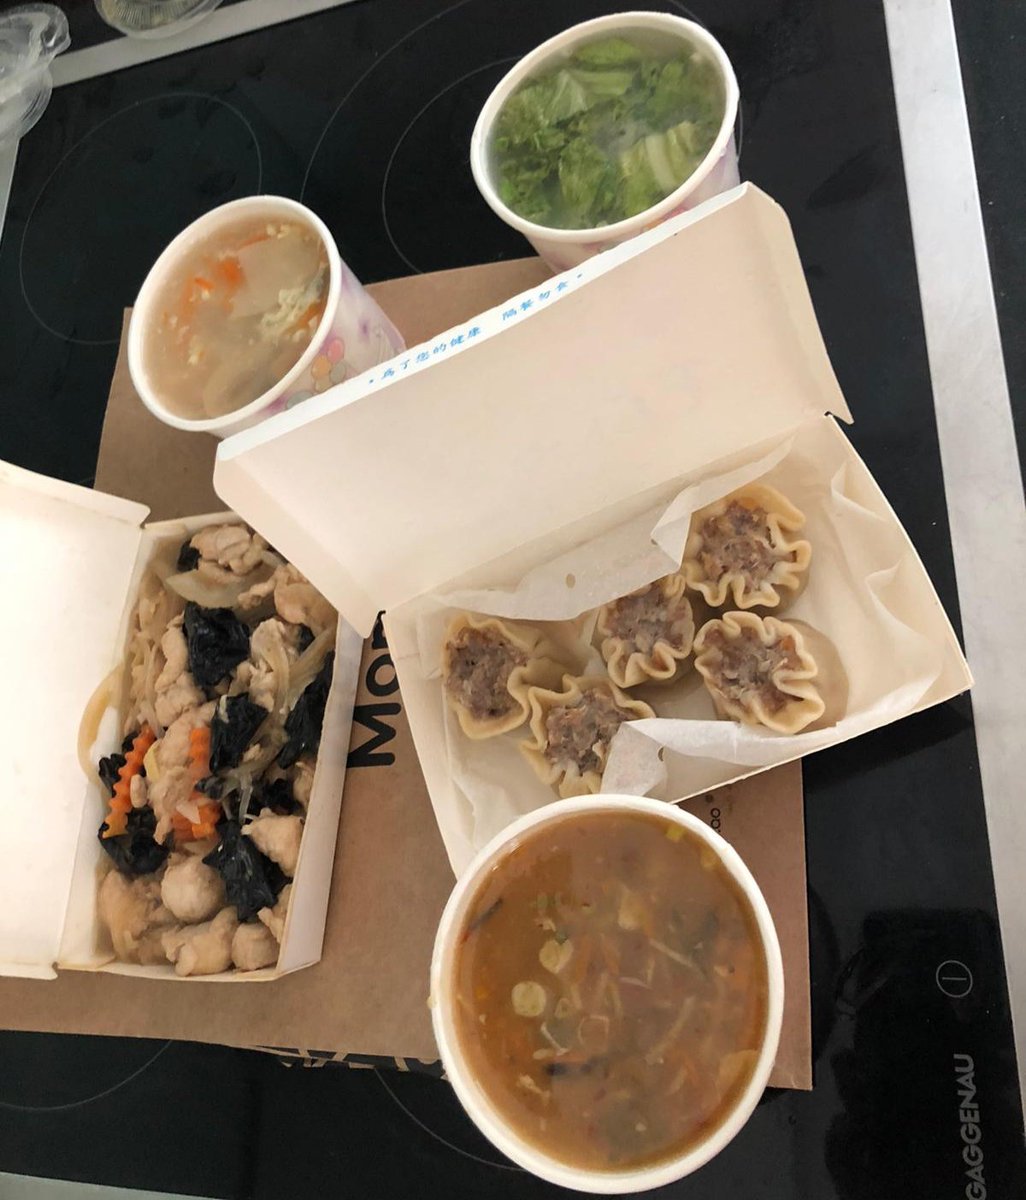 Continuing to sample the local options,  #Mamboo brought us a selection of Chinese food dishes.Each app is different to include how a customer tracks the order. Here's a look at how  #Mamboo does it; five key delivery moments with time stamps & real-time mamboy map tracker.